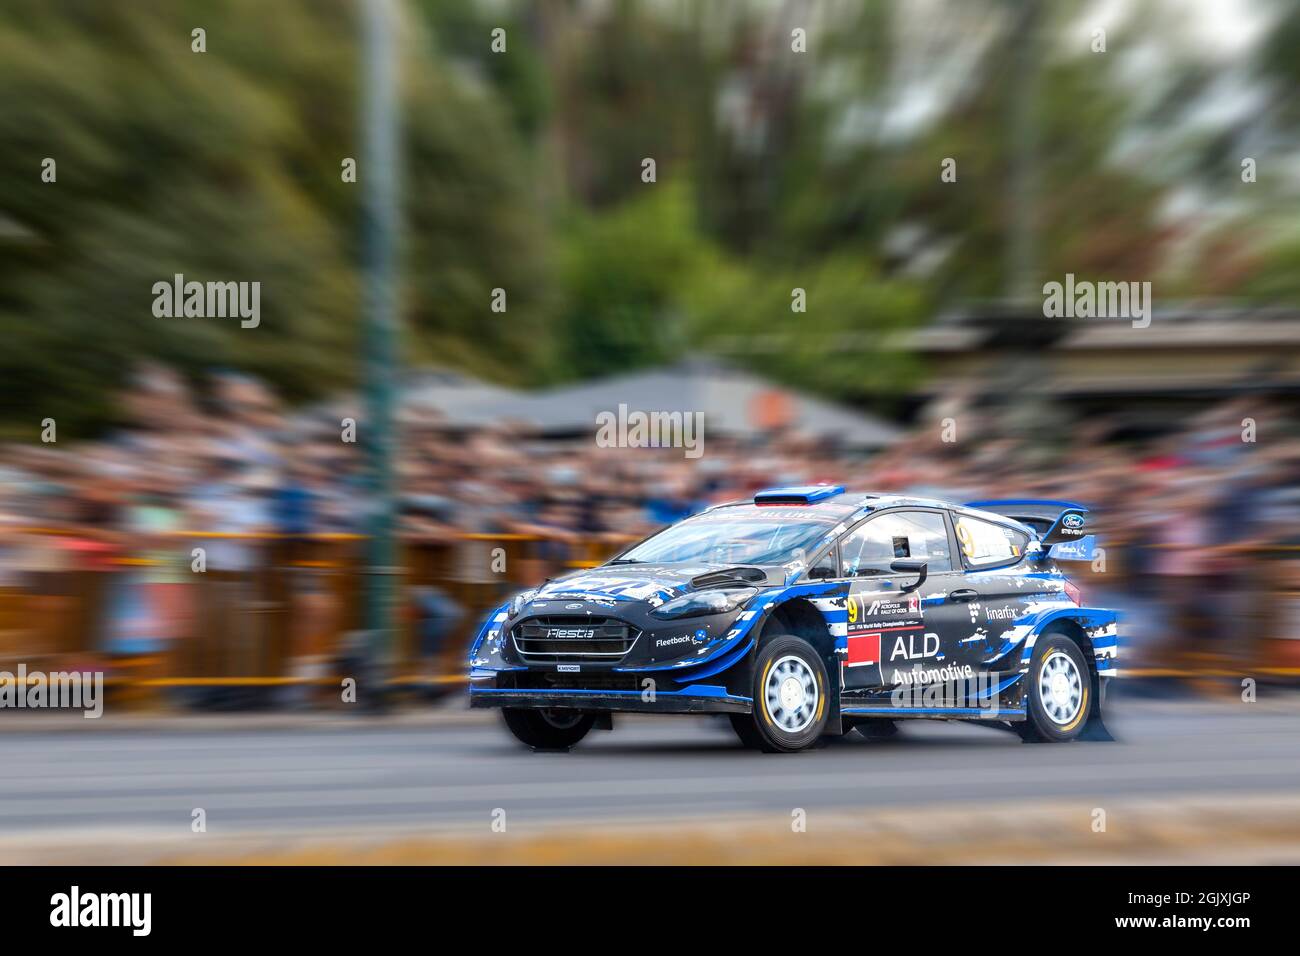 Racing car Ford Fiesta WRC during the first stage of Rally Acropolis 2021, held in Athens, Greece, also called 'The Rally of Gods'. Stock Photo